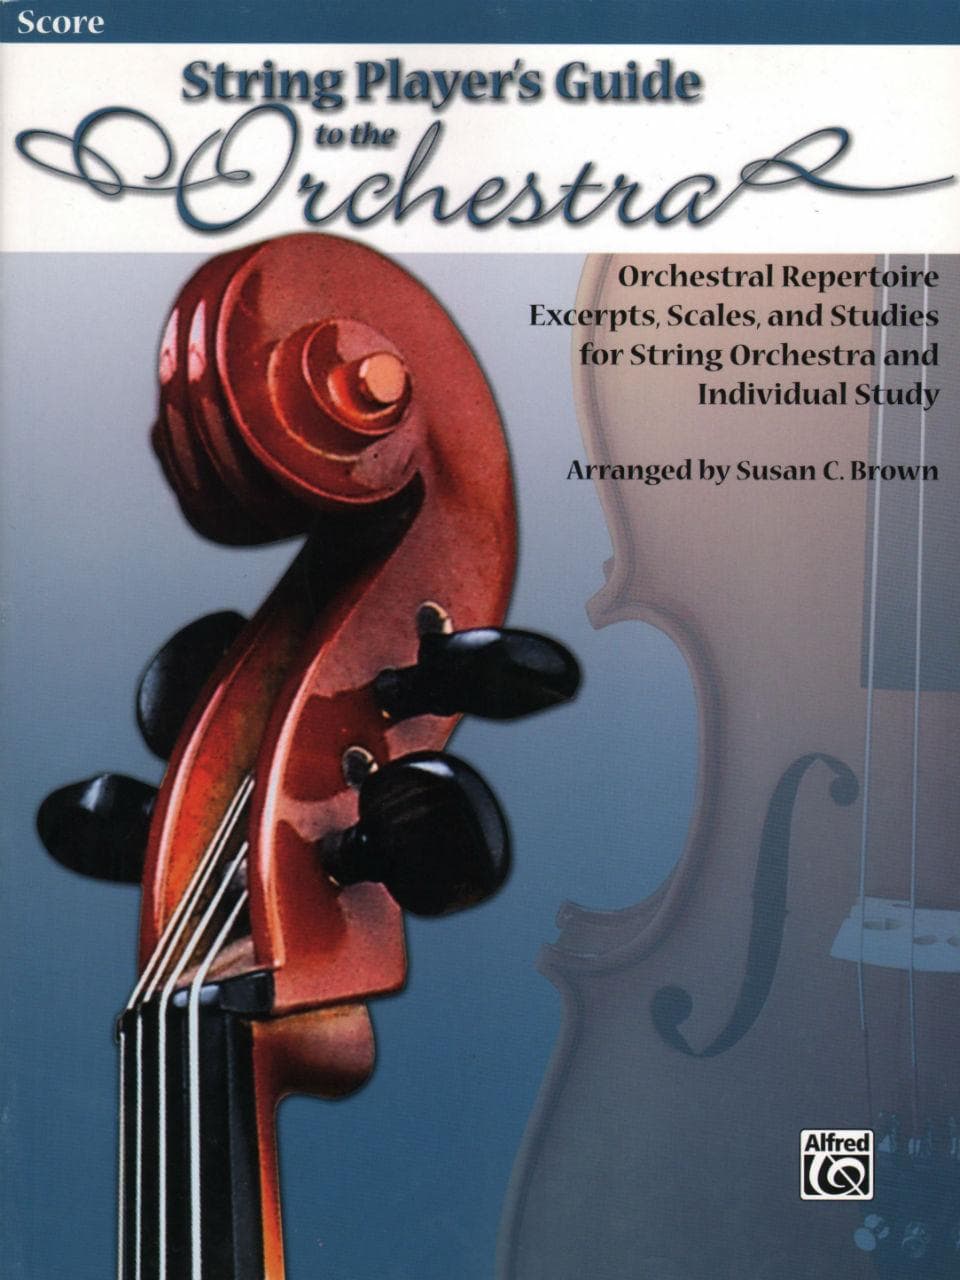 Brown, Susan - String Player's Guide to the Orchestra Score - Alfred Publication